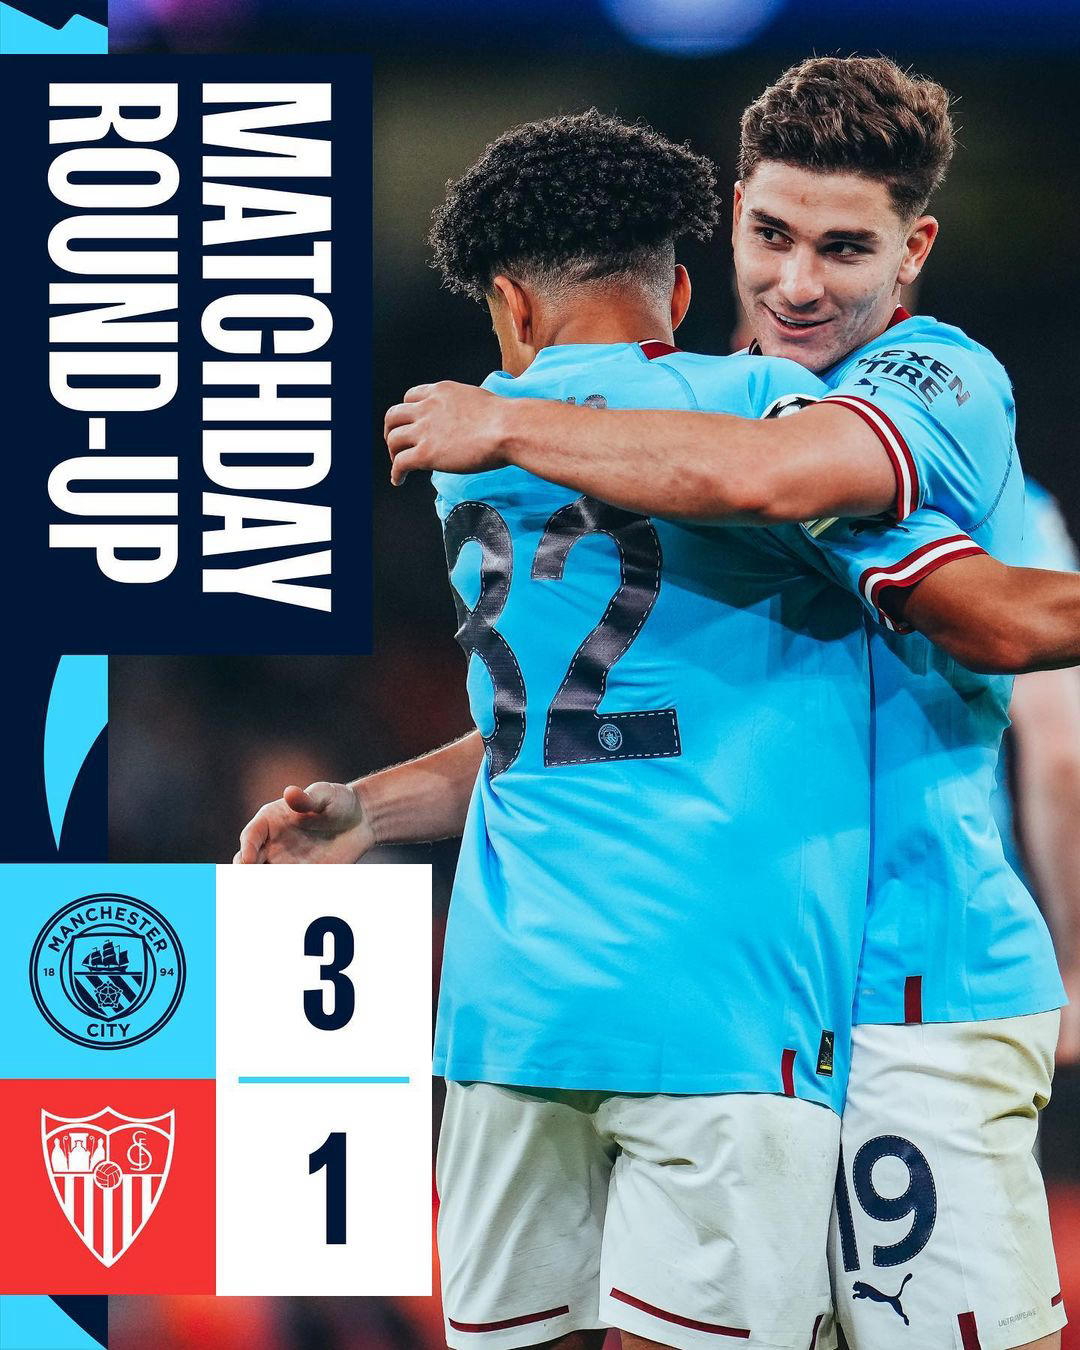 Manchester City - Finishing the #UCL group stage with the W